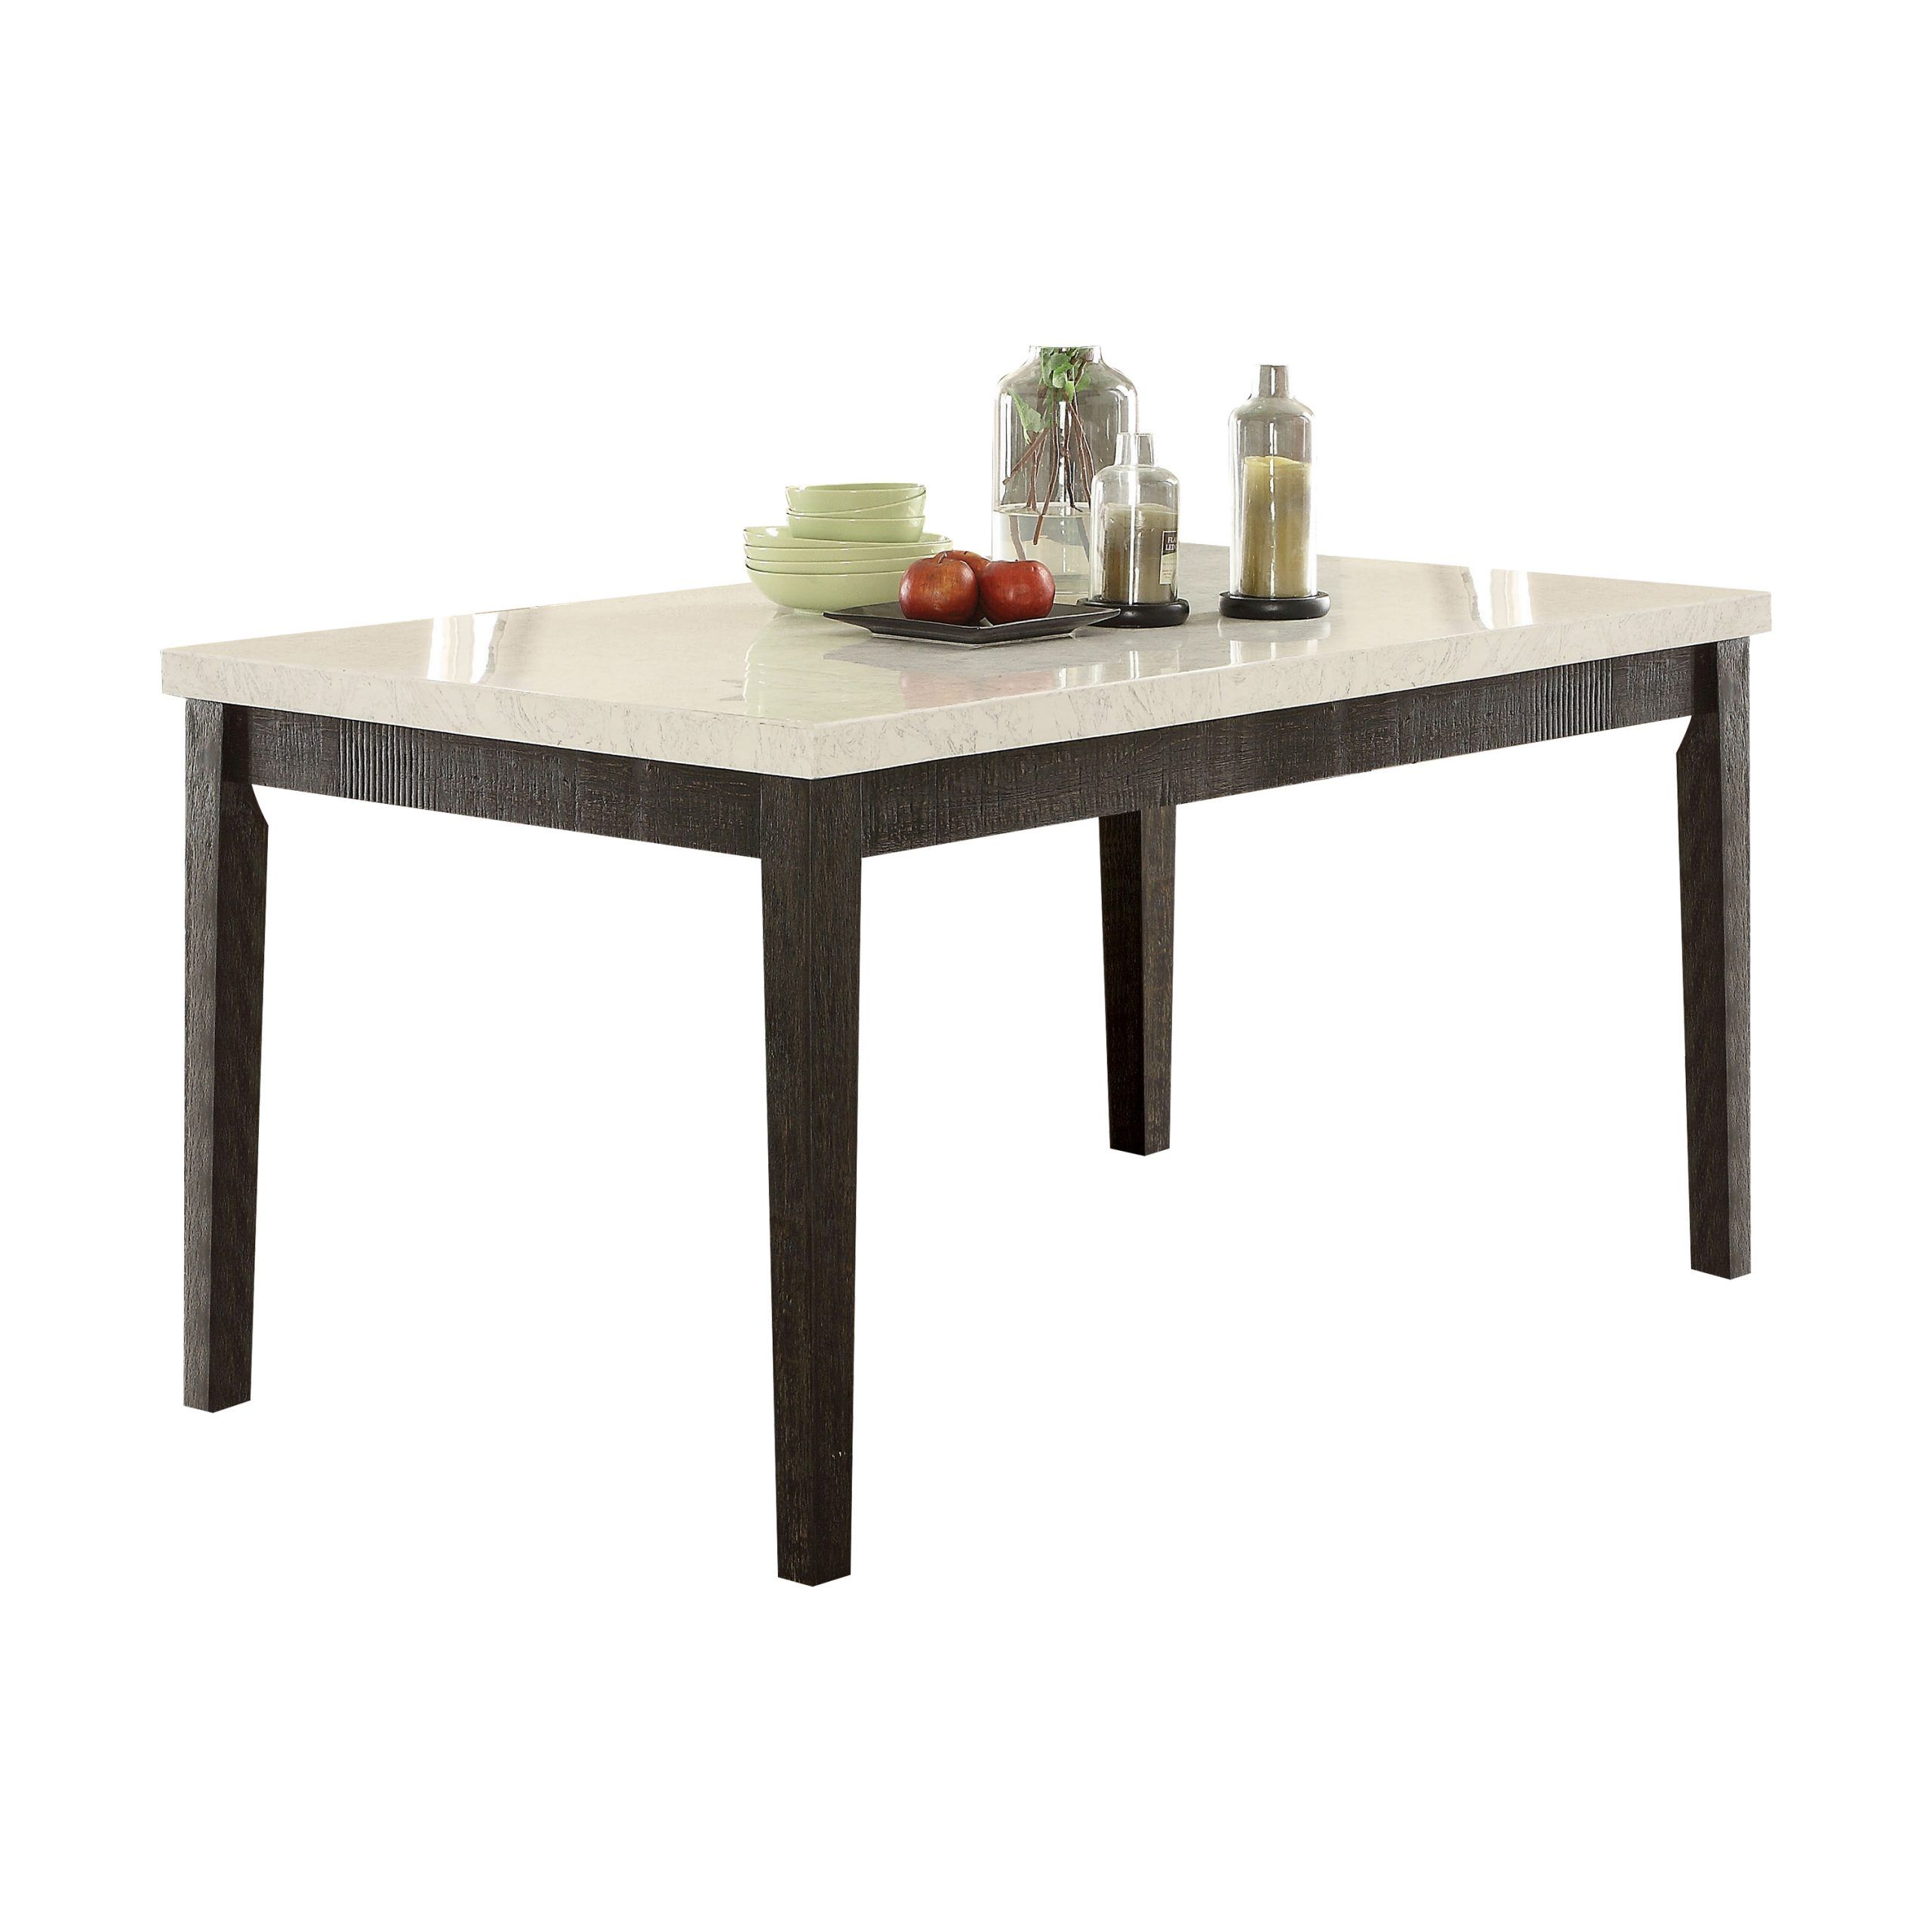 Acme Nolan Rectangular Dining Table, White Marble Throughout Most Current White Rectangular Dining Tables (View 15 of 15)